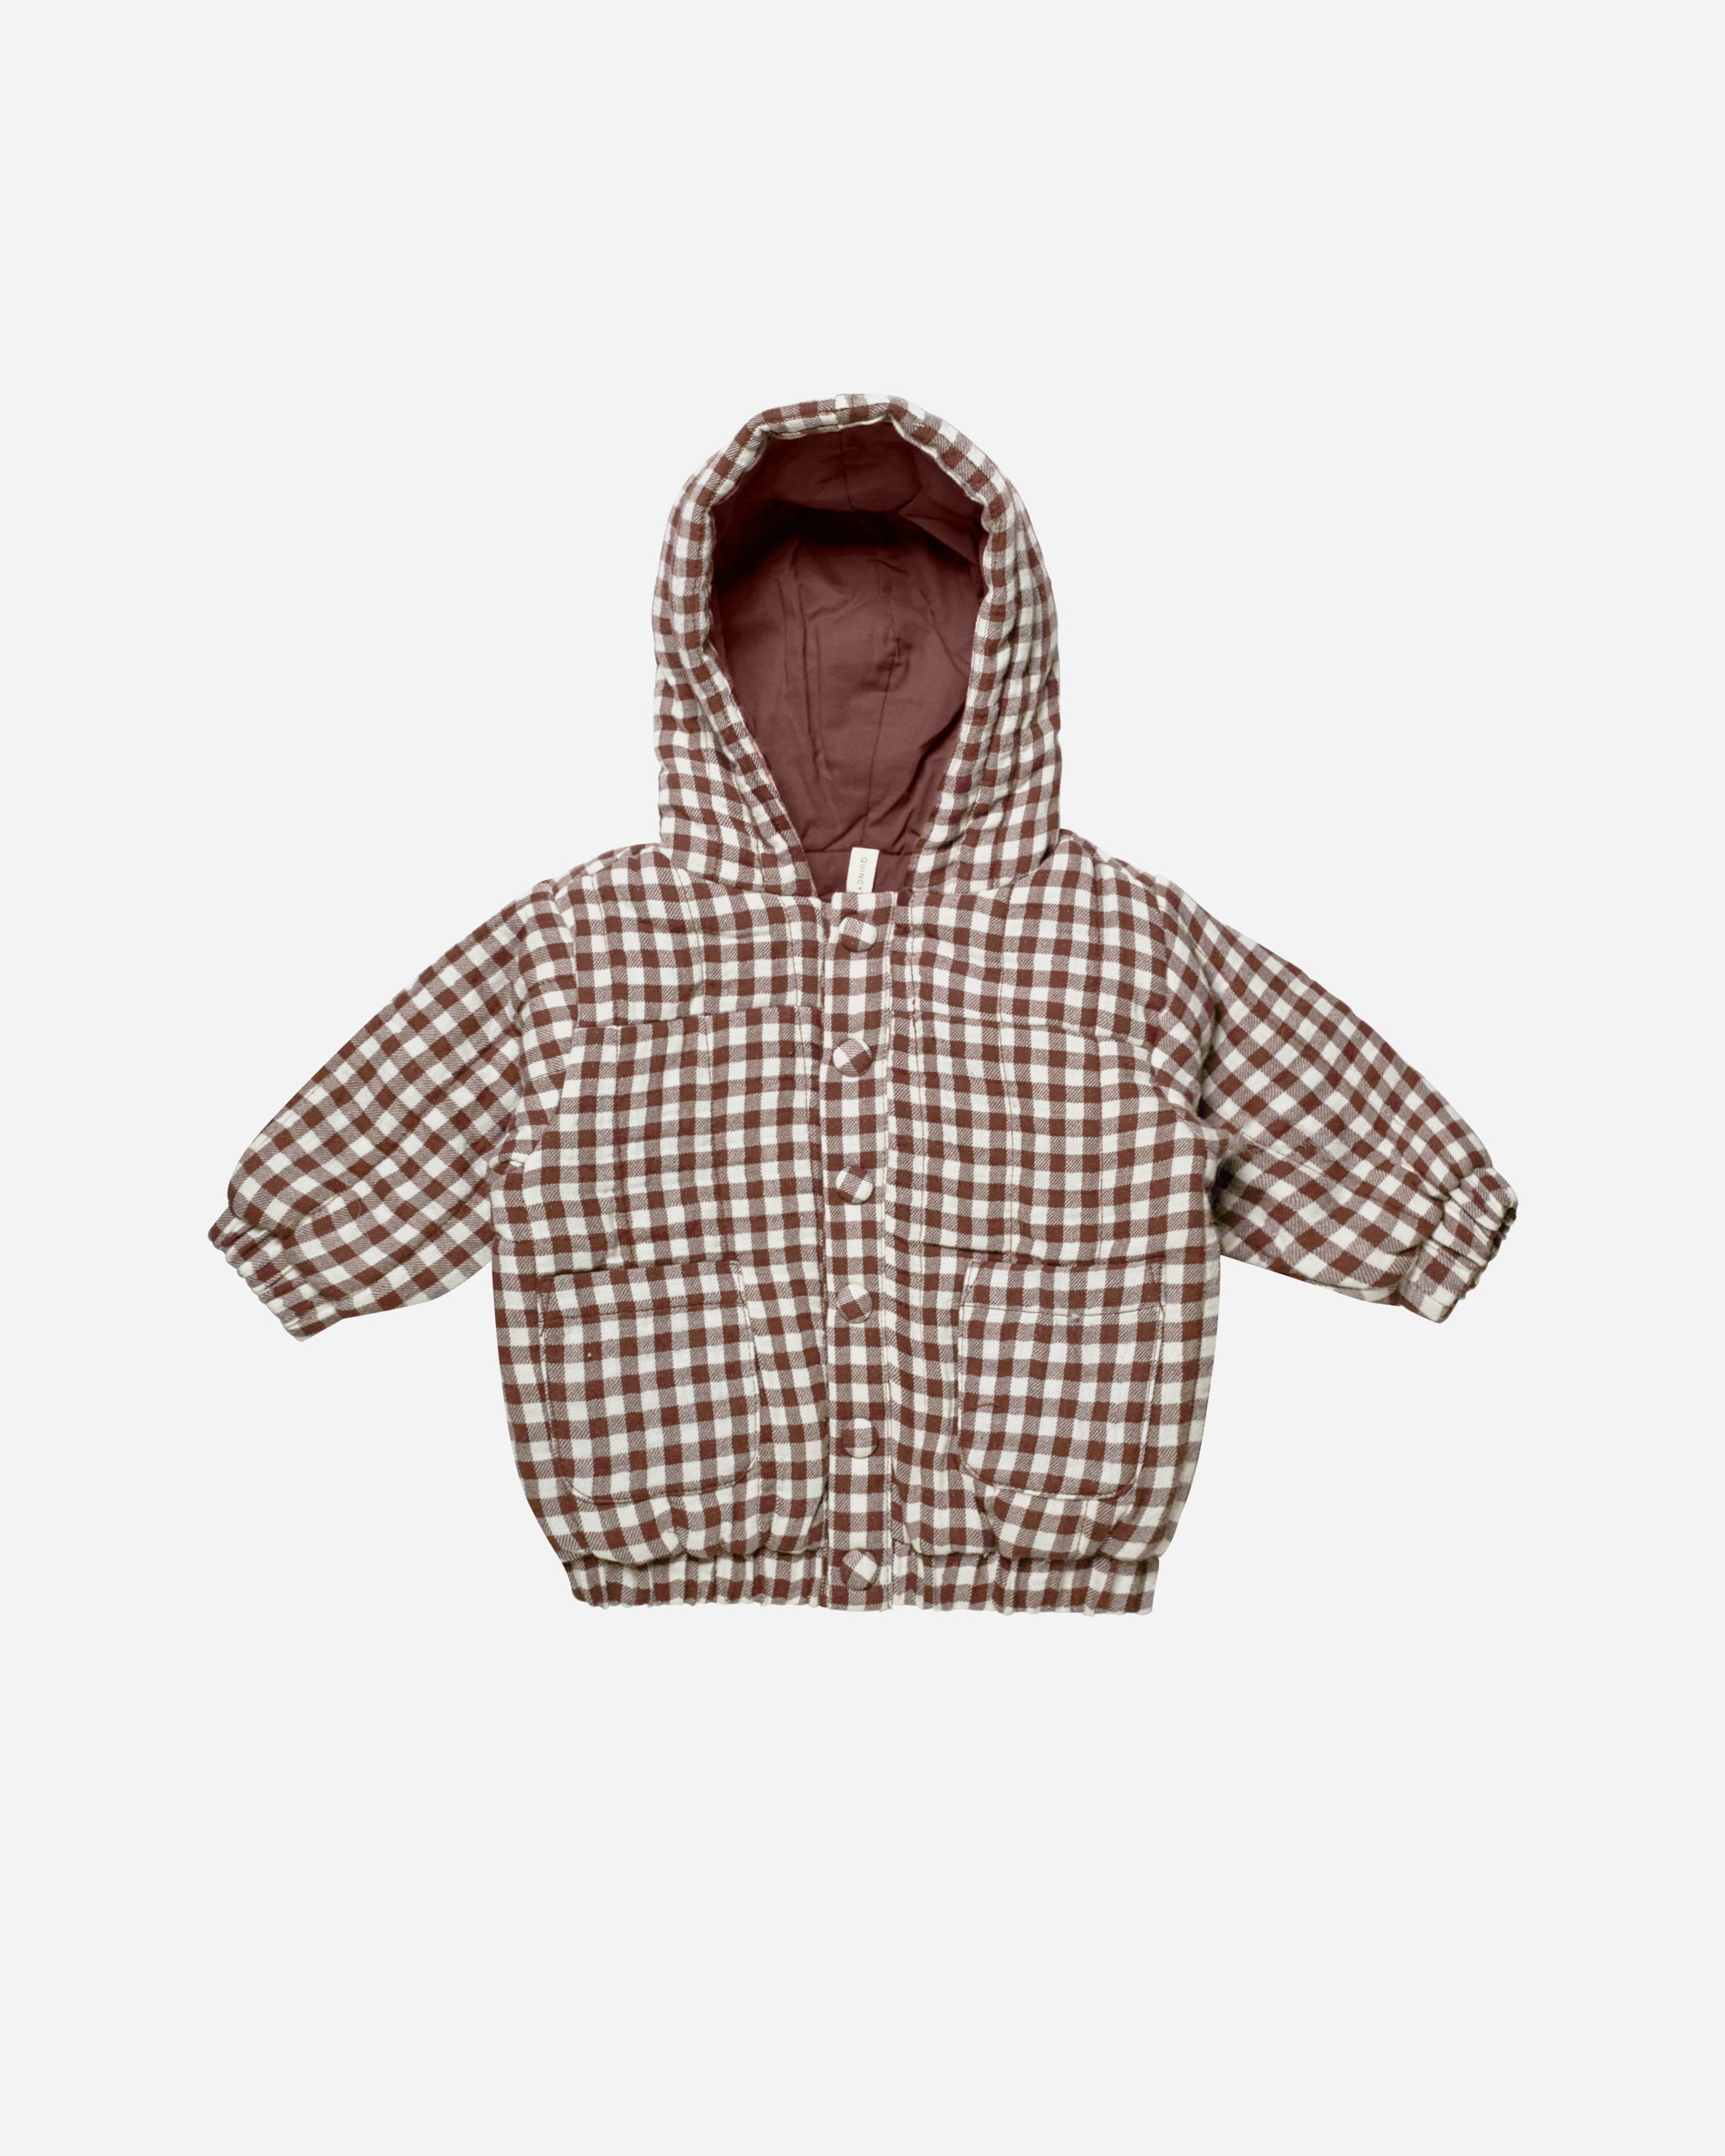 Hooded Woven Jacket || Plum Gingham - Rylee + Cru | Kids Clothes | Trendy Baby Clothes | Modern Infant Outfits |